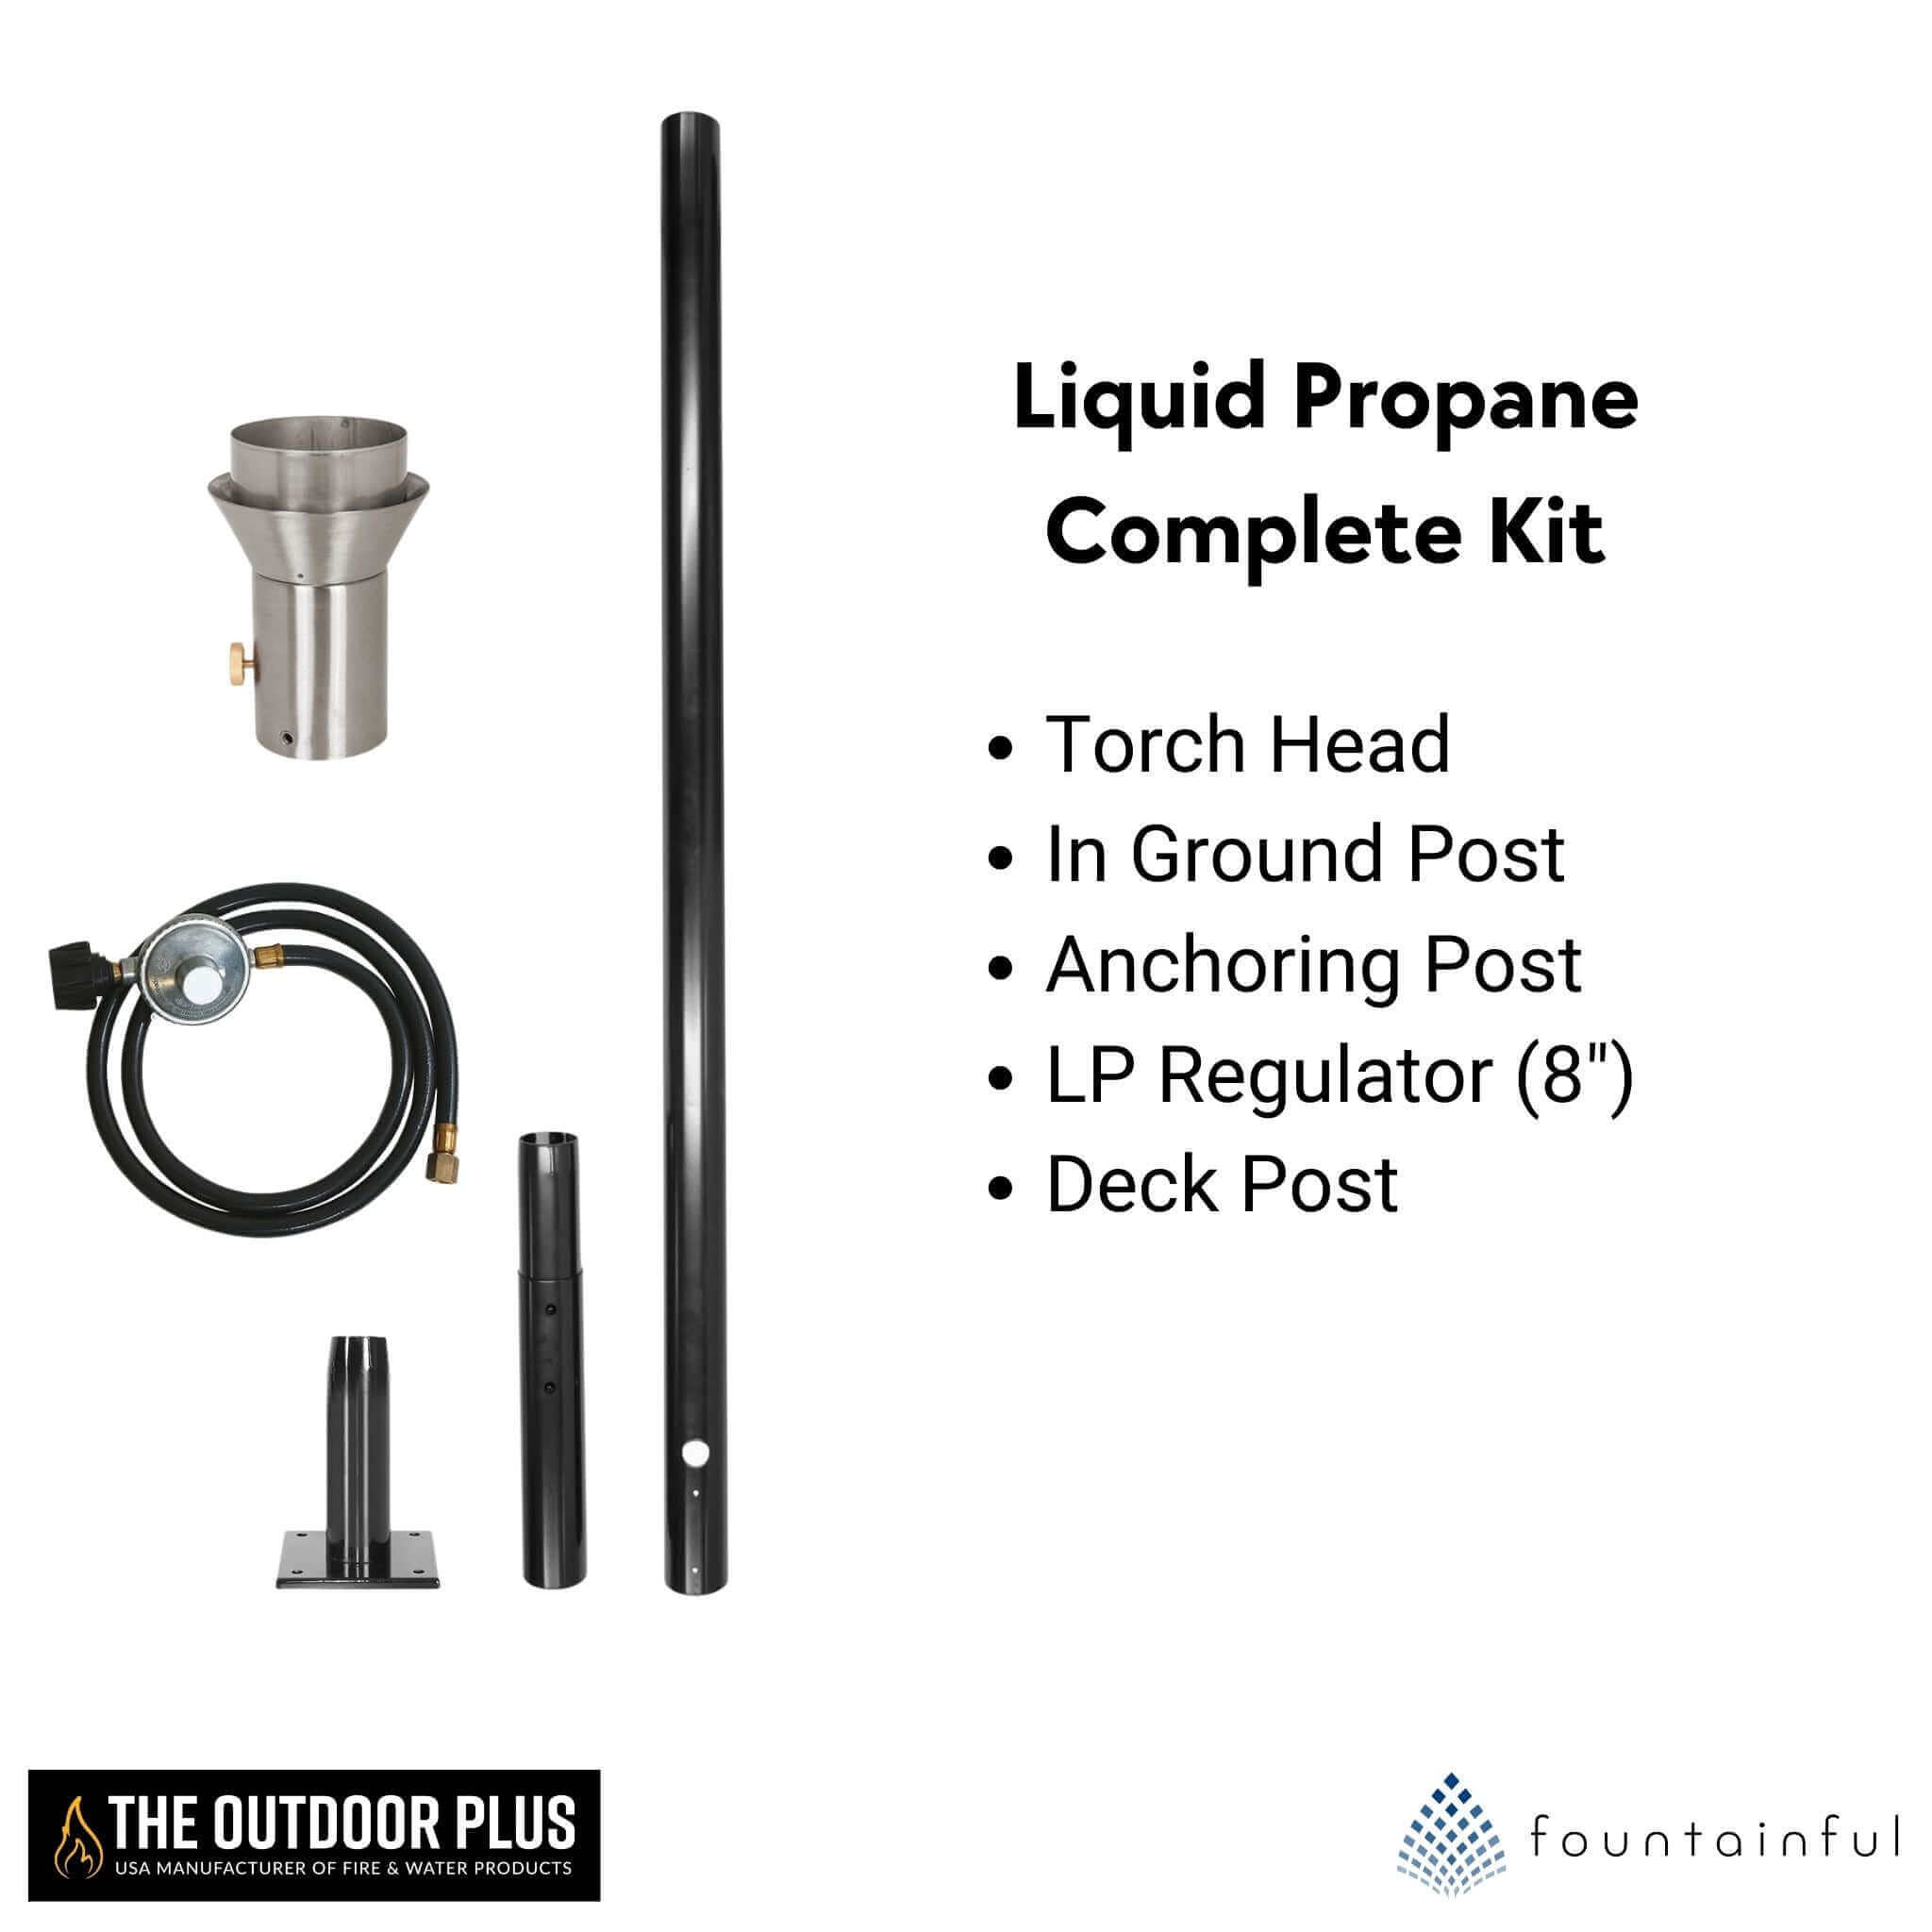 Cyclone Fire Torch COMPLETE KIT - Stainless Steel - The Outdoor Plus